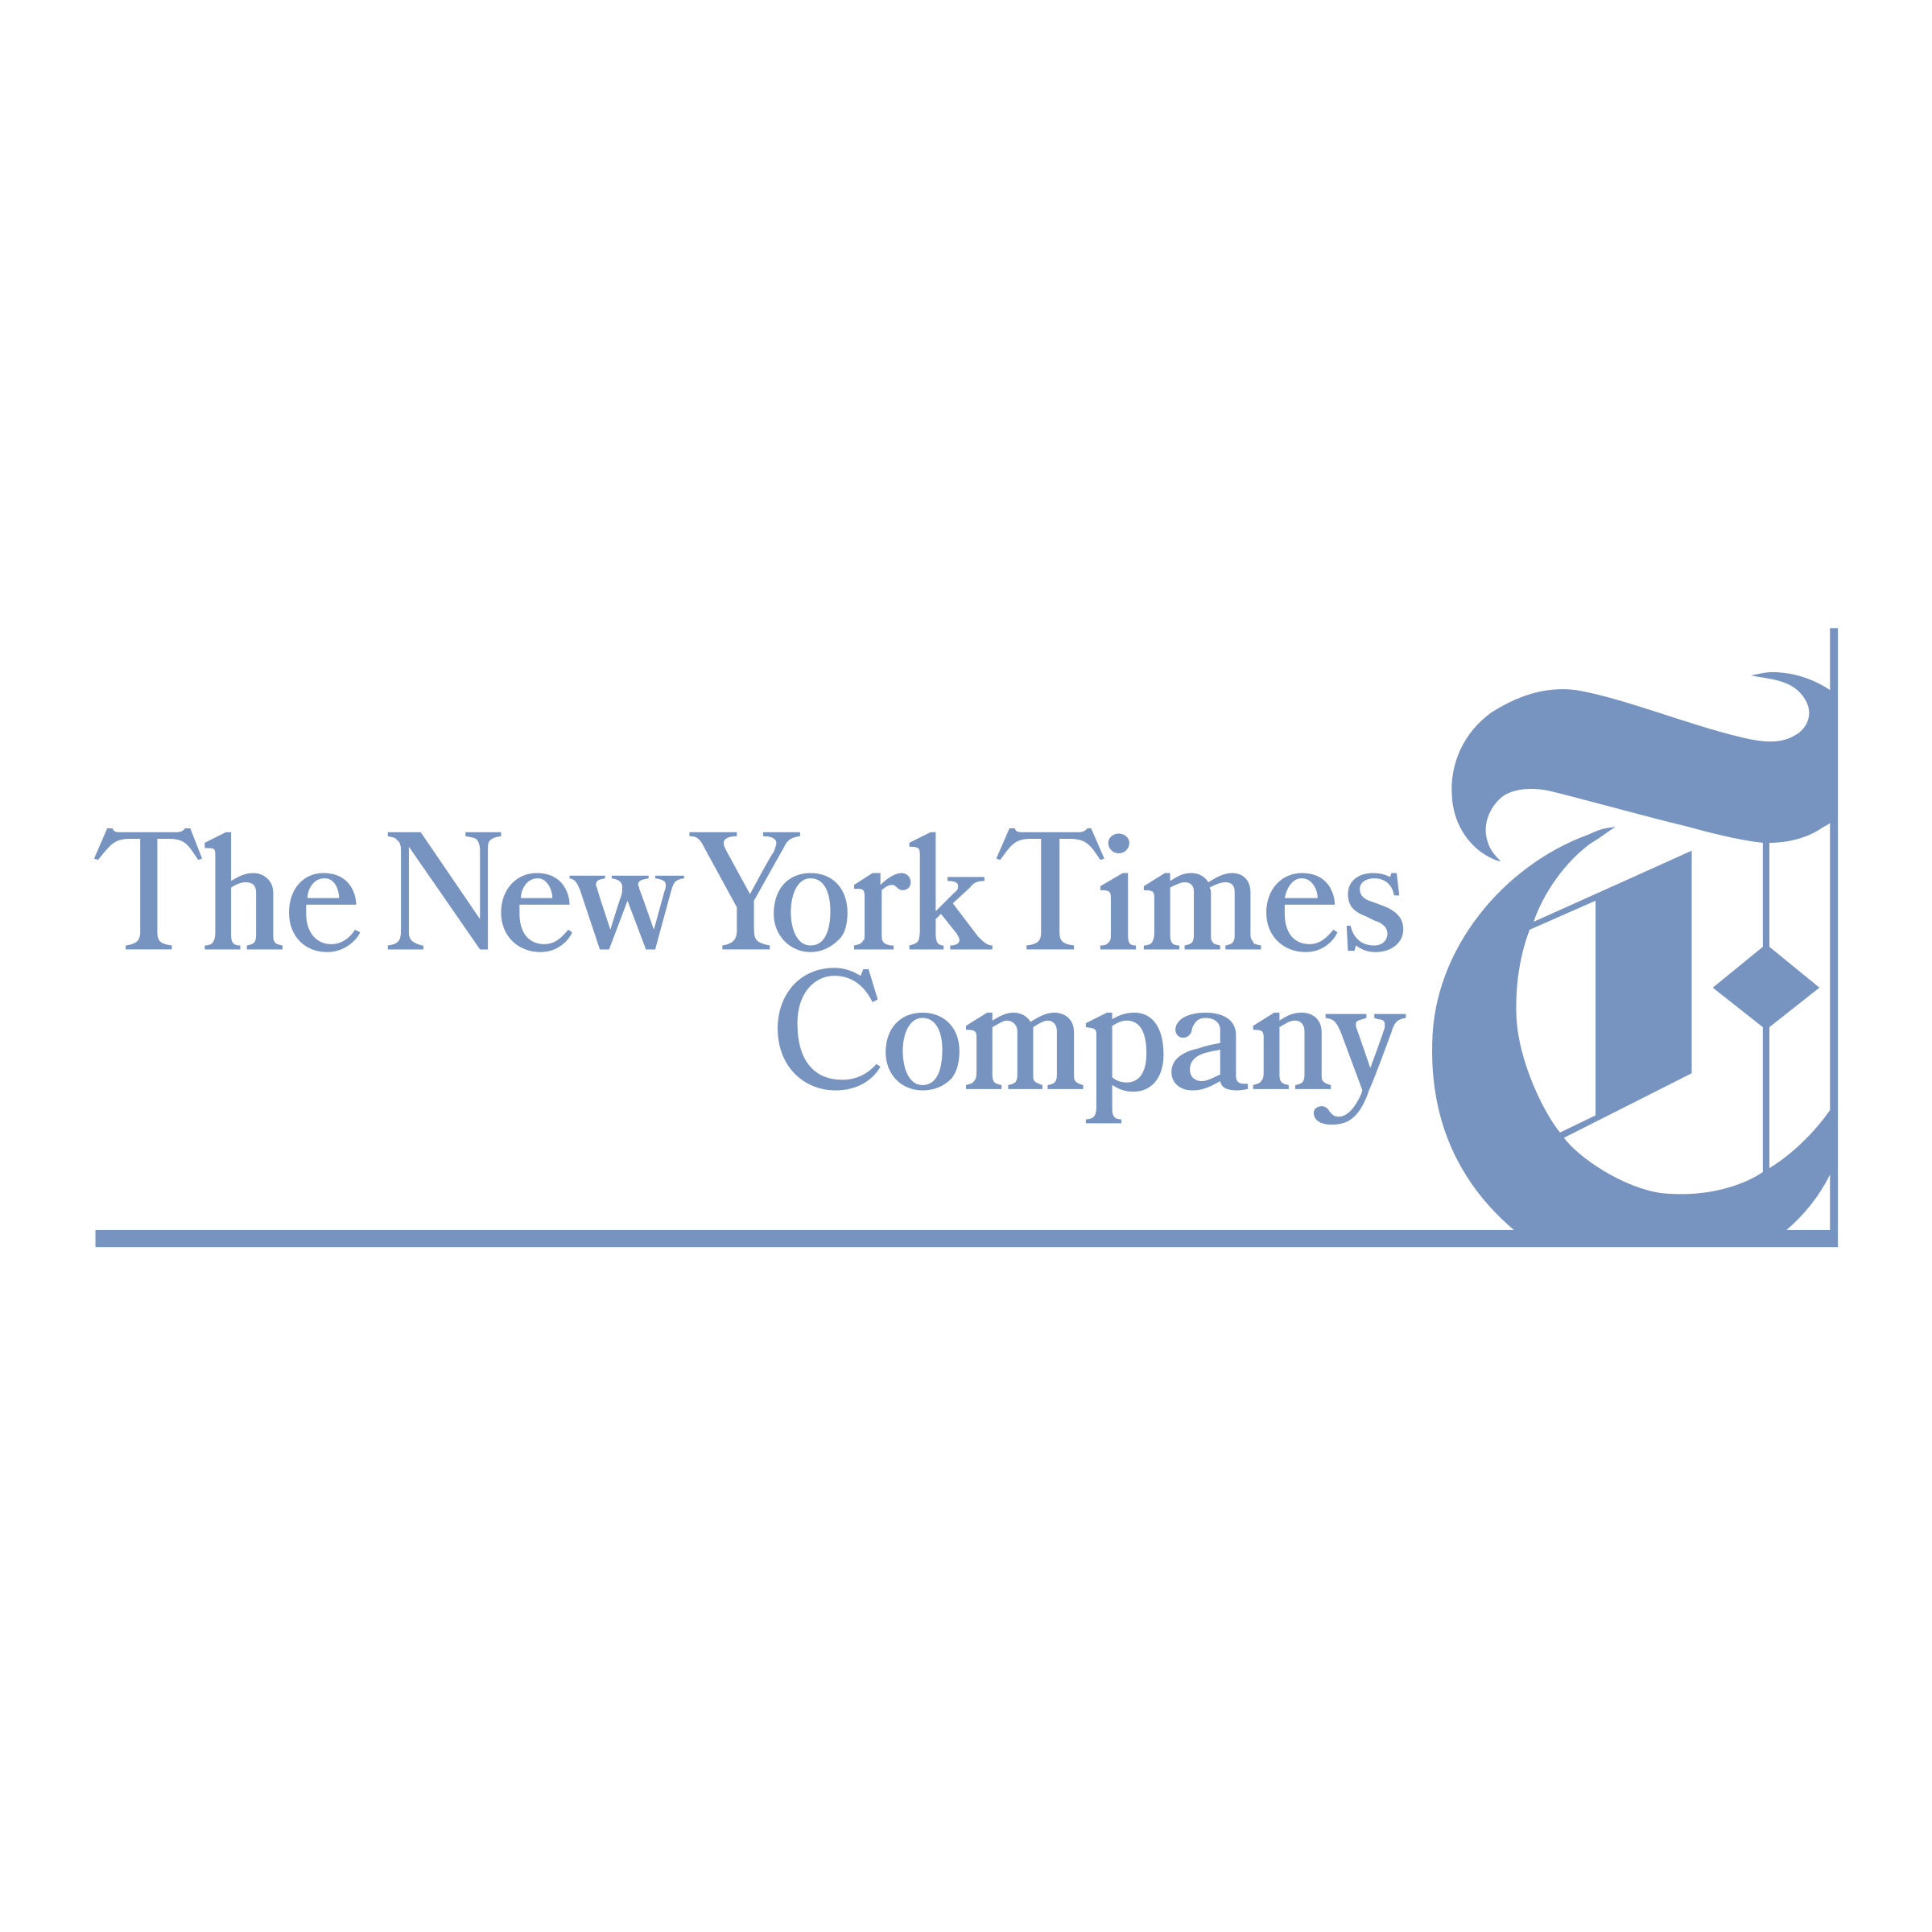 The New York Times Company Logo Png Transparent & Svg Vector Pluspng.com  - New York Times, Transparent background PNG HD thumbnail